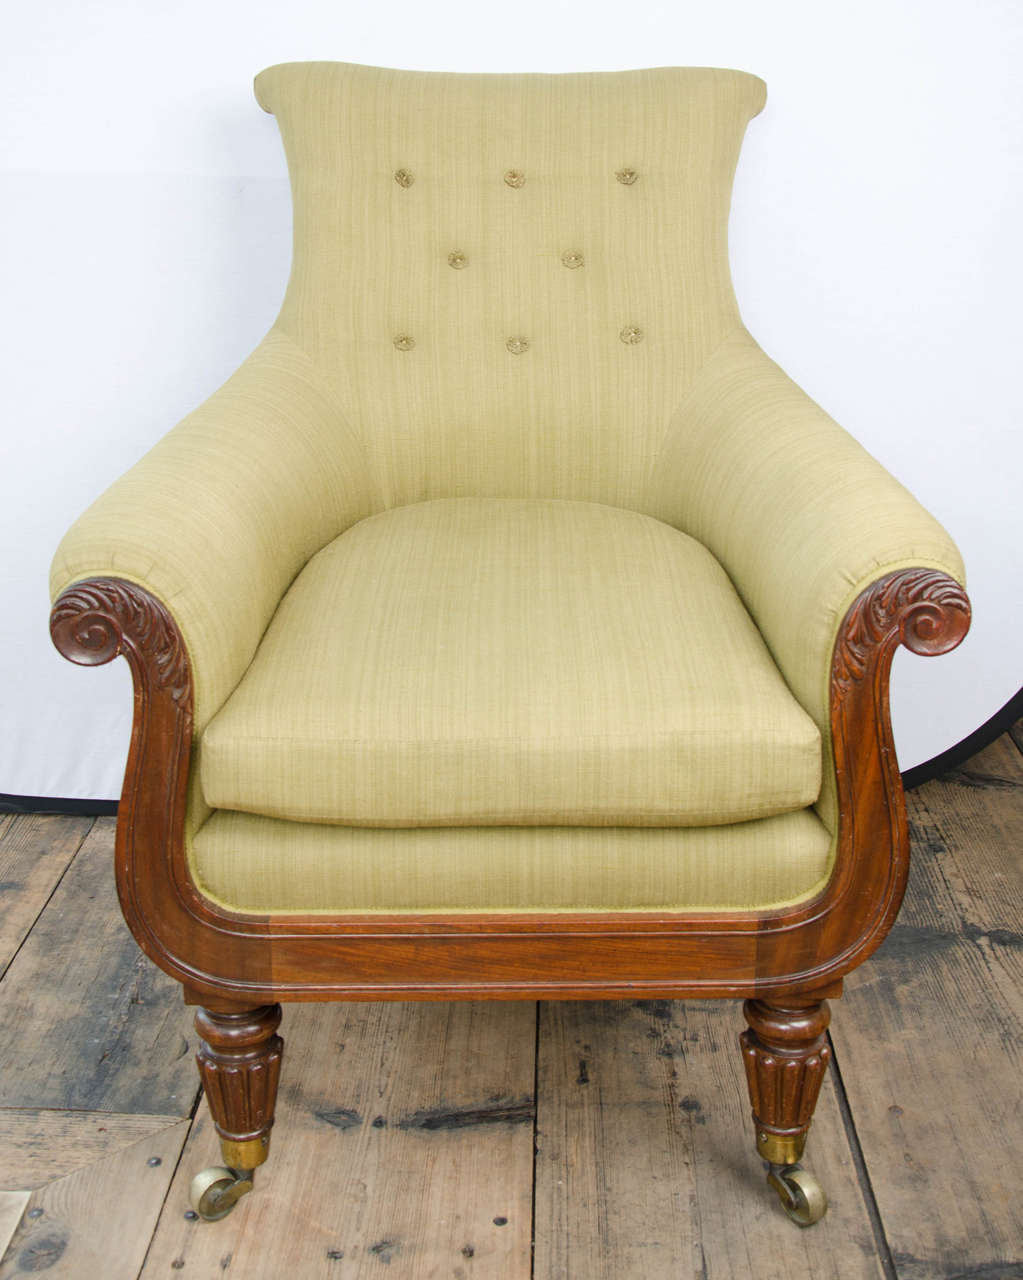 Regency mahogany library bergere in the manner of Gillows with outscrolled back and arms on reeded tapering legs.